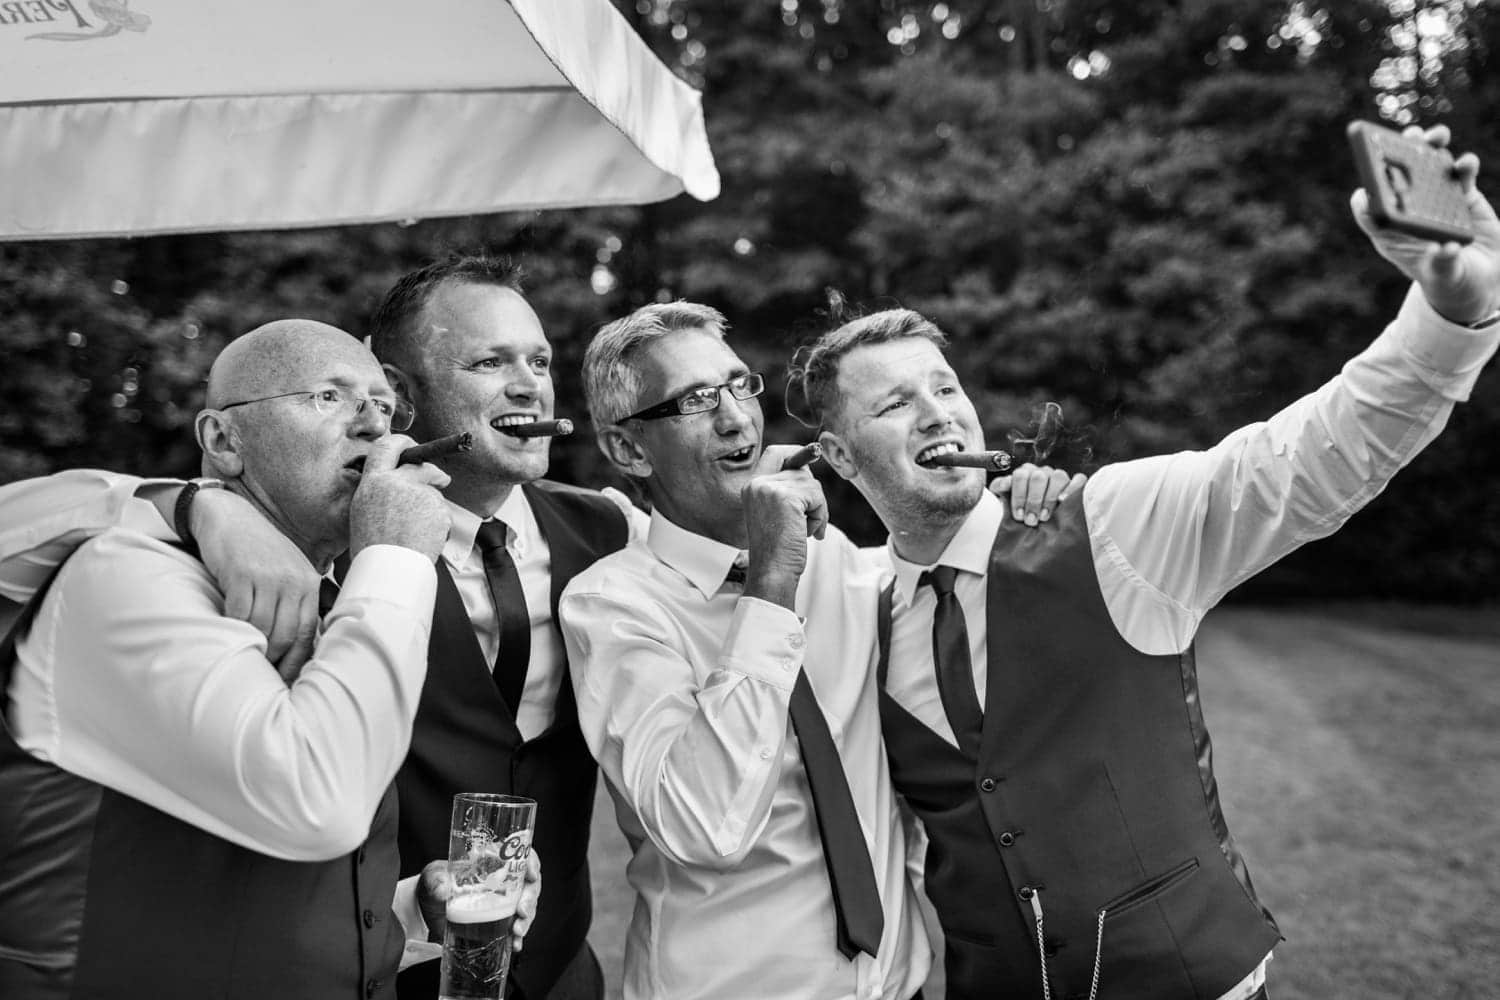 Summer wedding reception at Pencoed House in South Wales